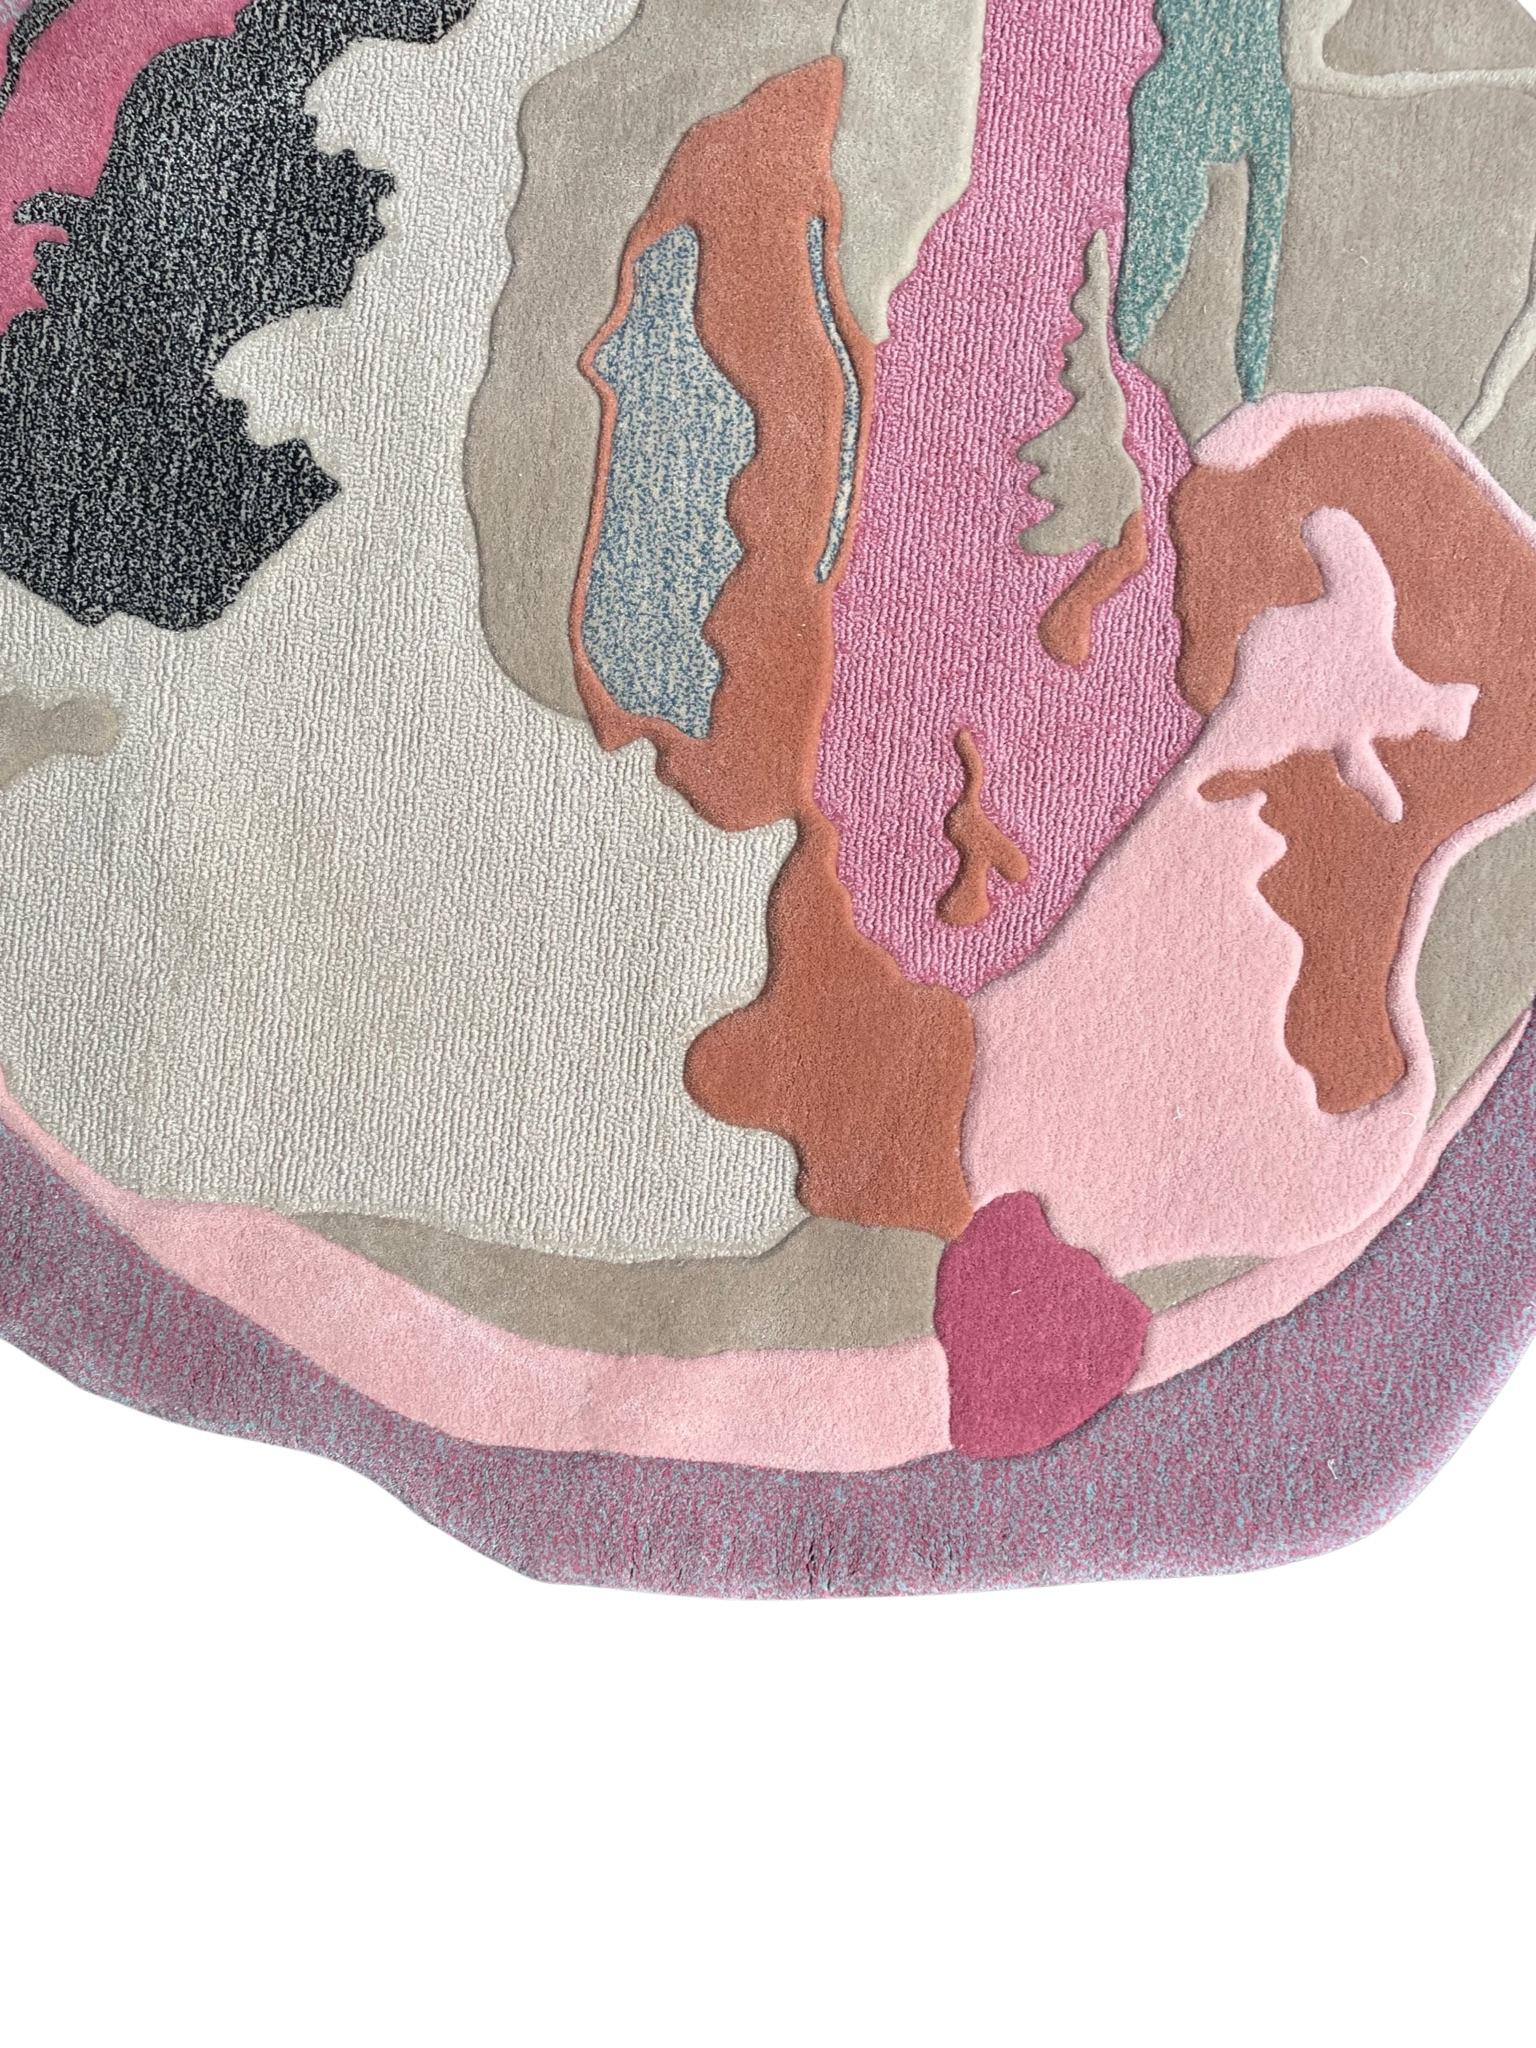 ' Pink Opaque ' contemporary irregular round shape hand-tufted Viscose wool rug by RAG Home

Original Designed by Rannisa Soraya from RAG Home
Hand-tufted with mixed Methods and Colours. It can be customised in size upon request. Made by order.